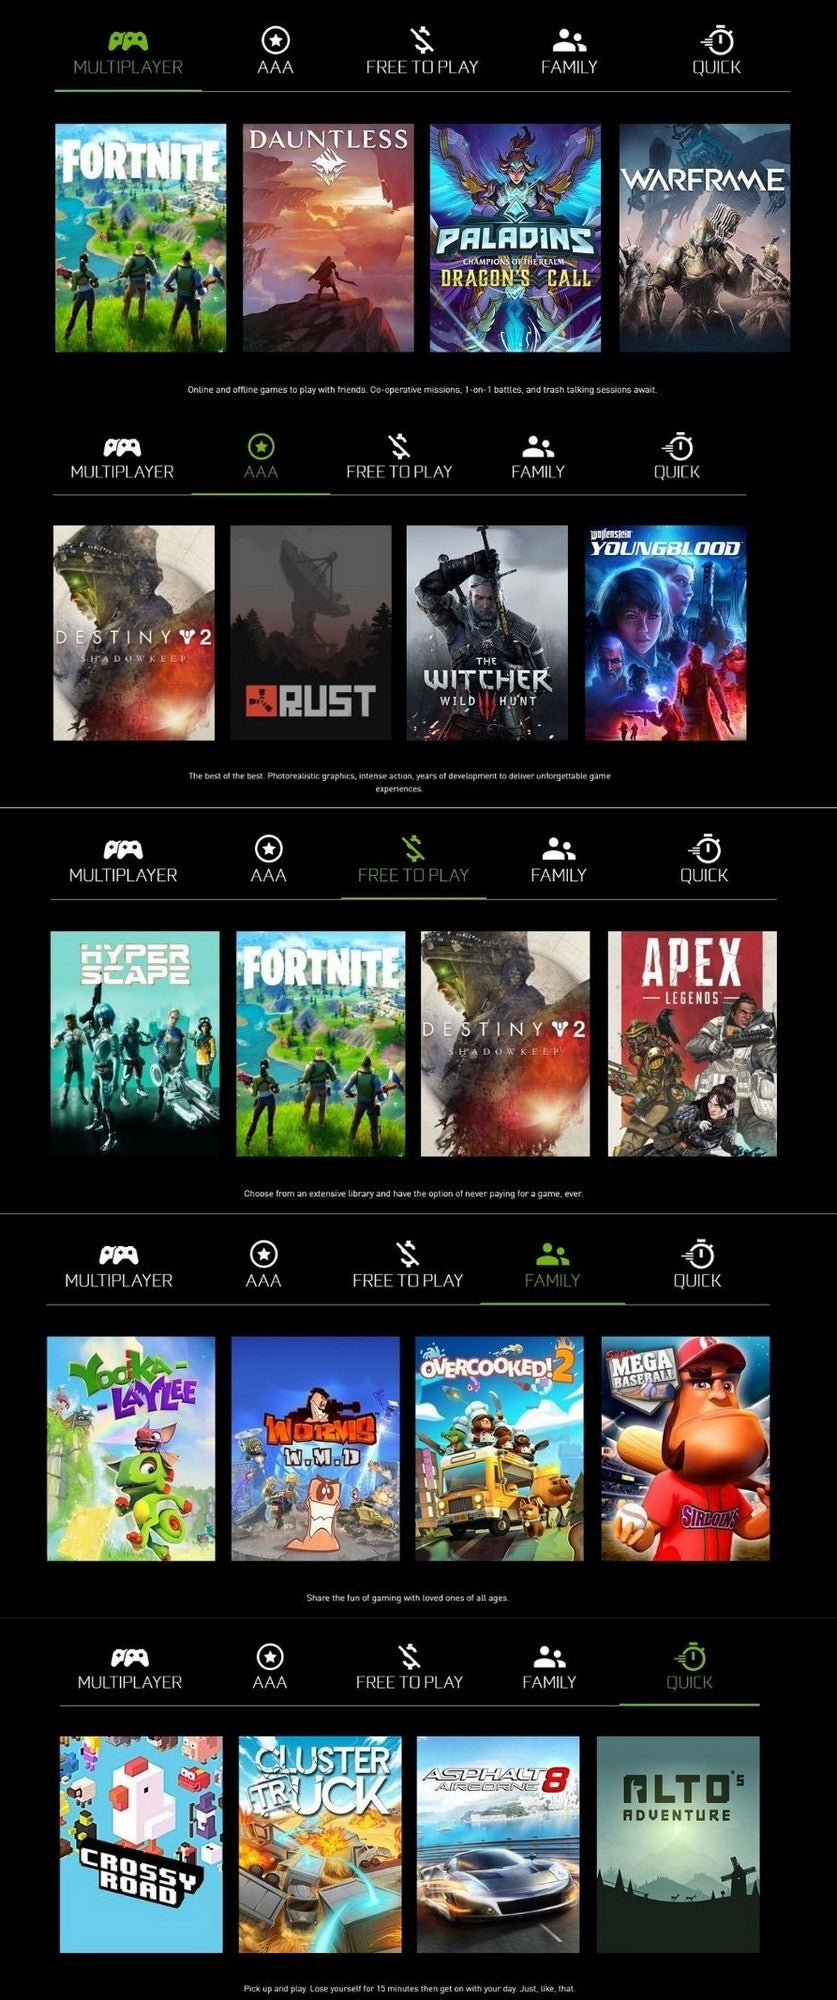 NVIDIA SHIELD Android TV Pro 4K HDR Streaming Media Player; High  Performance, Dolby Vision, 3GB RAM, 2x USB, Works with Alexa  (945-12897-2500-101) 